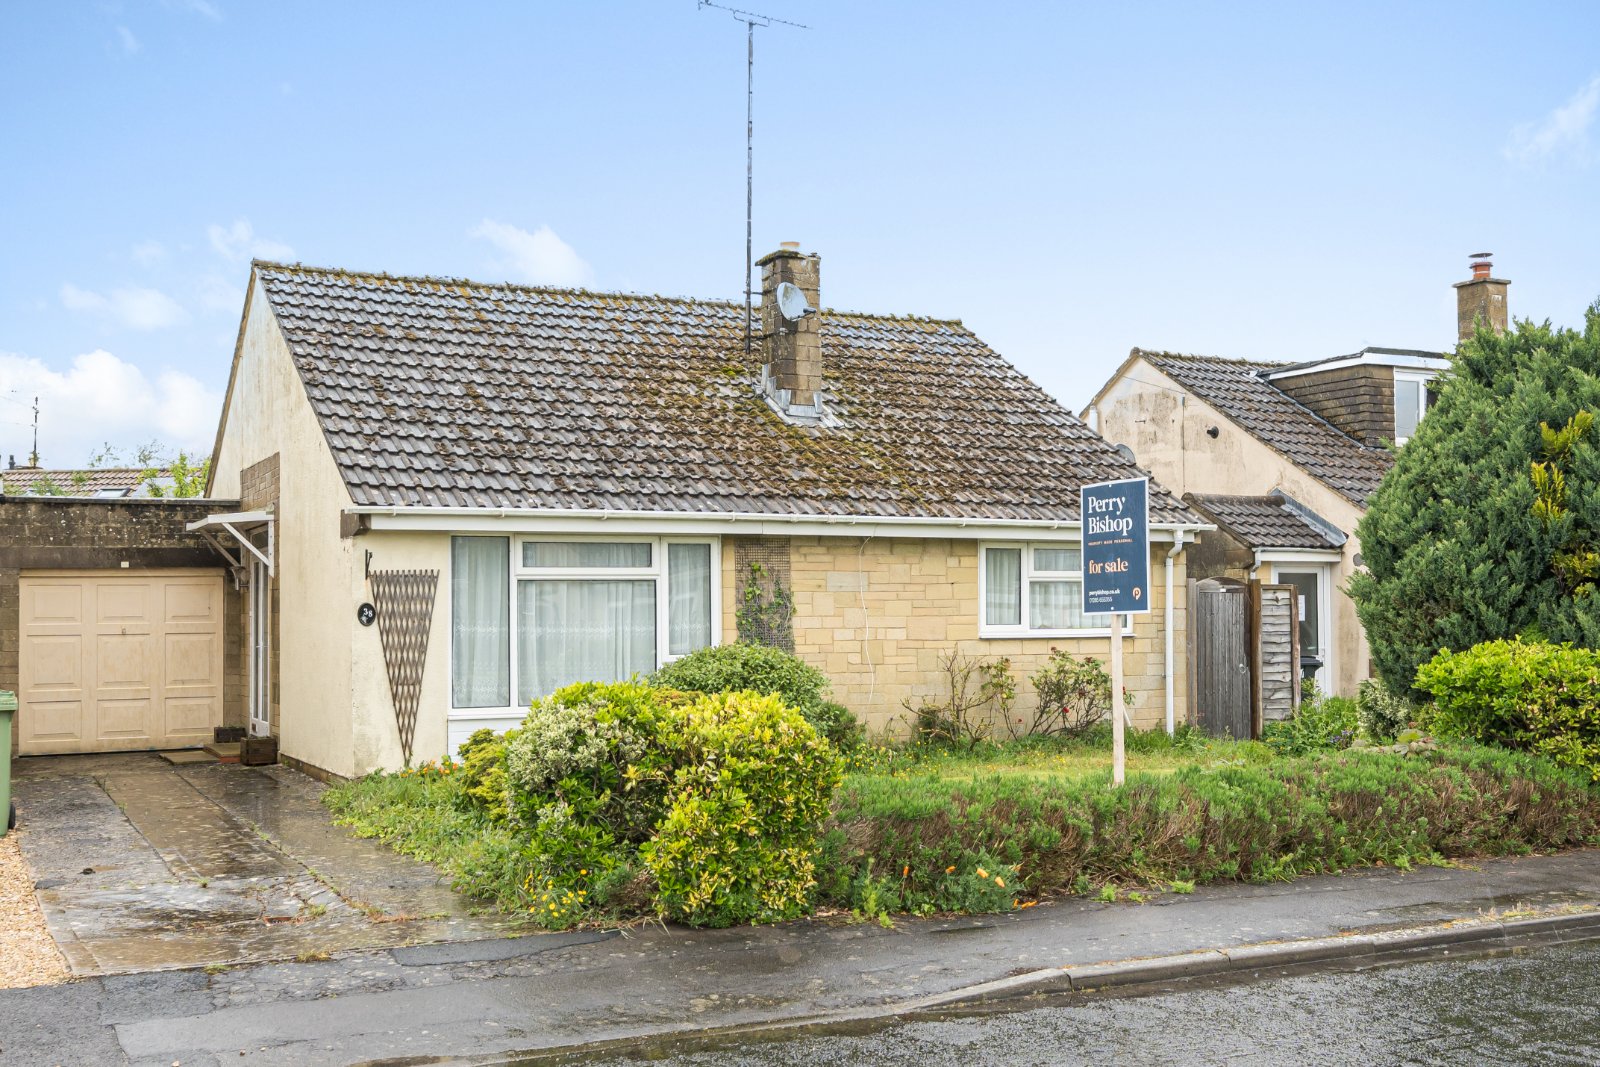 Meadow Way, South Cerney, Cirencester, Gloucestershire, GL7